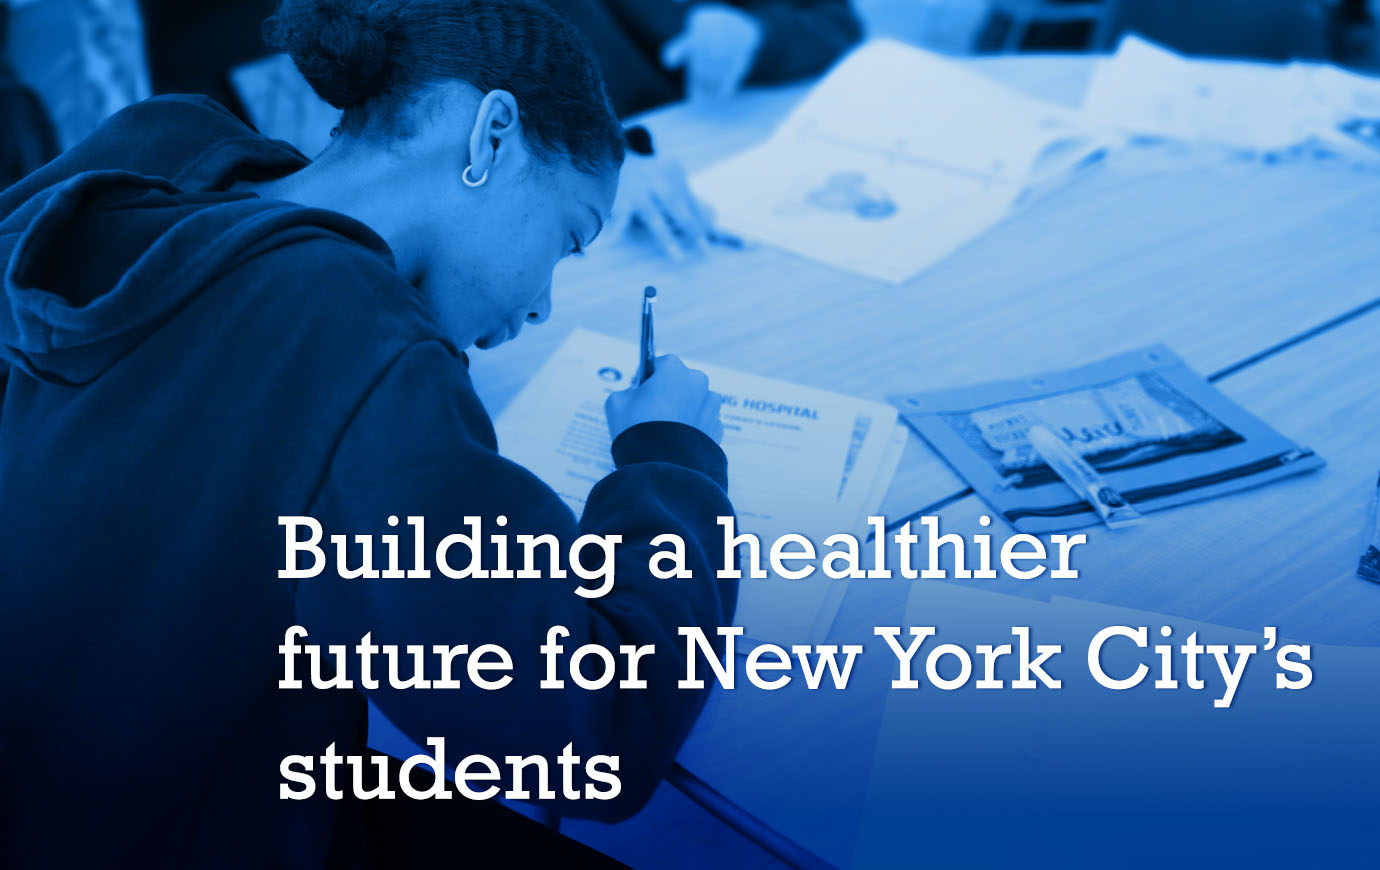 Building a healthier future for New York City’s students